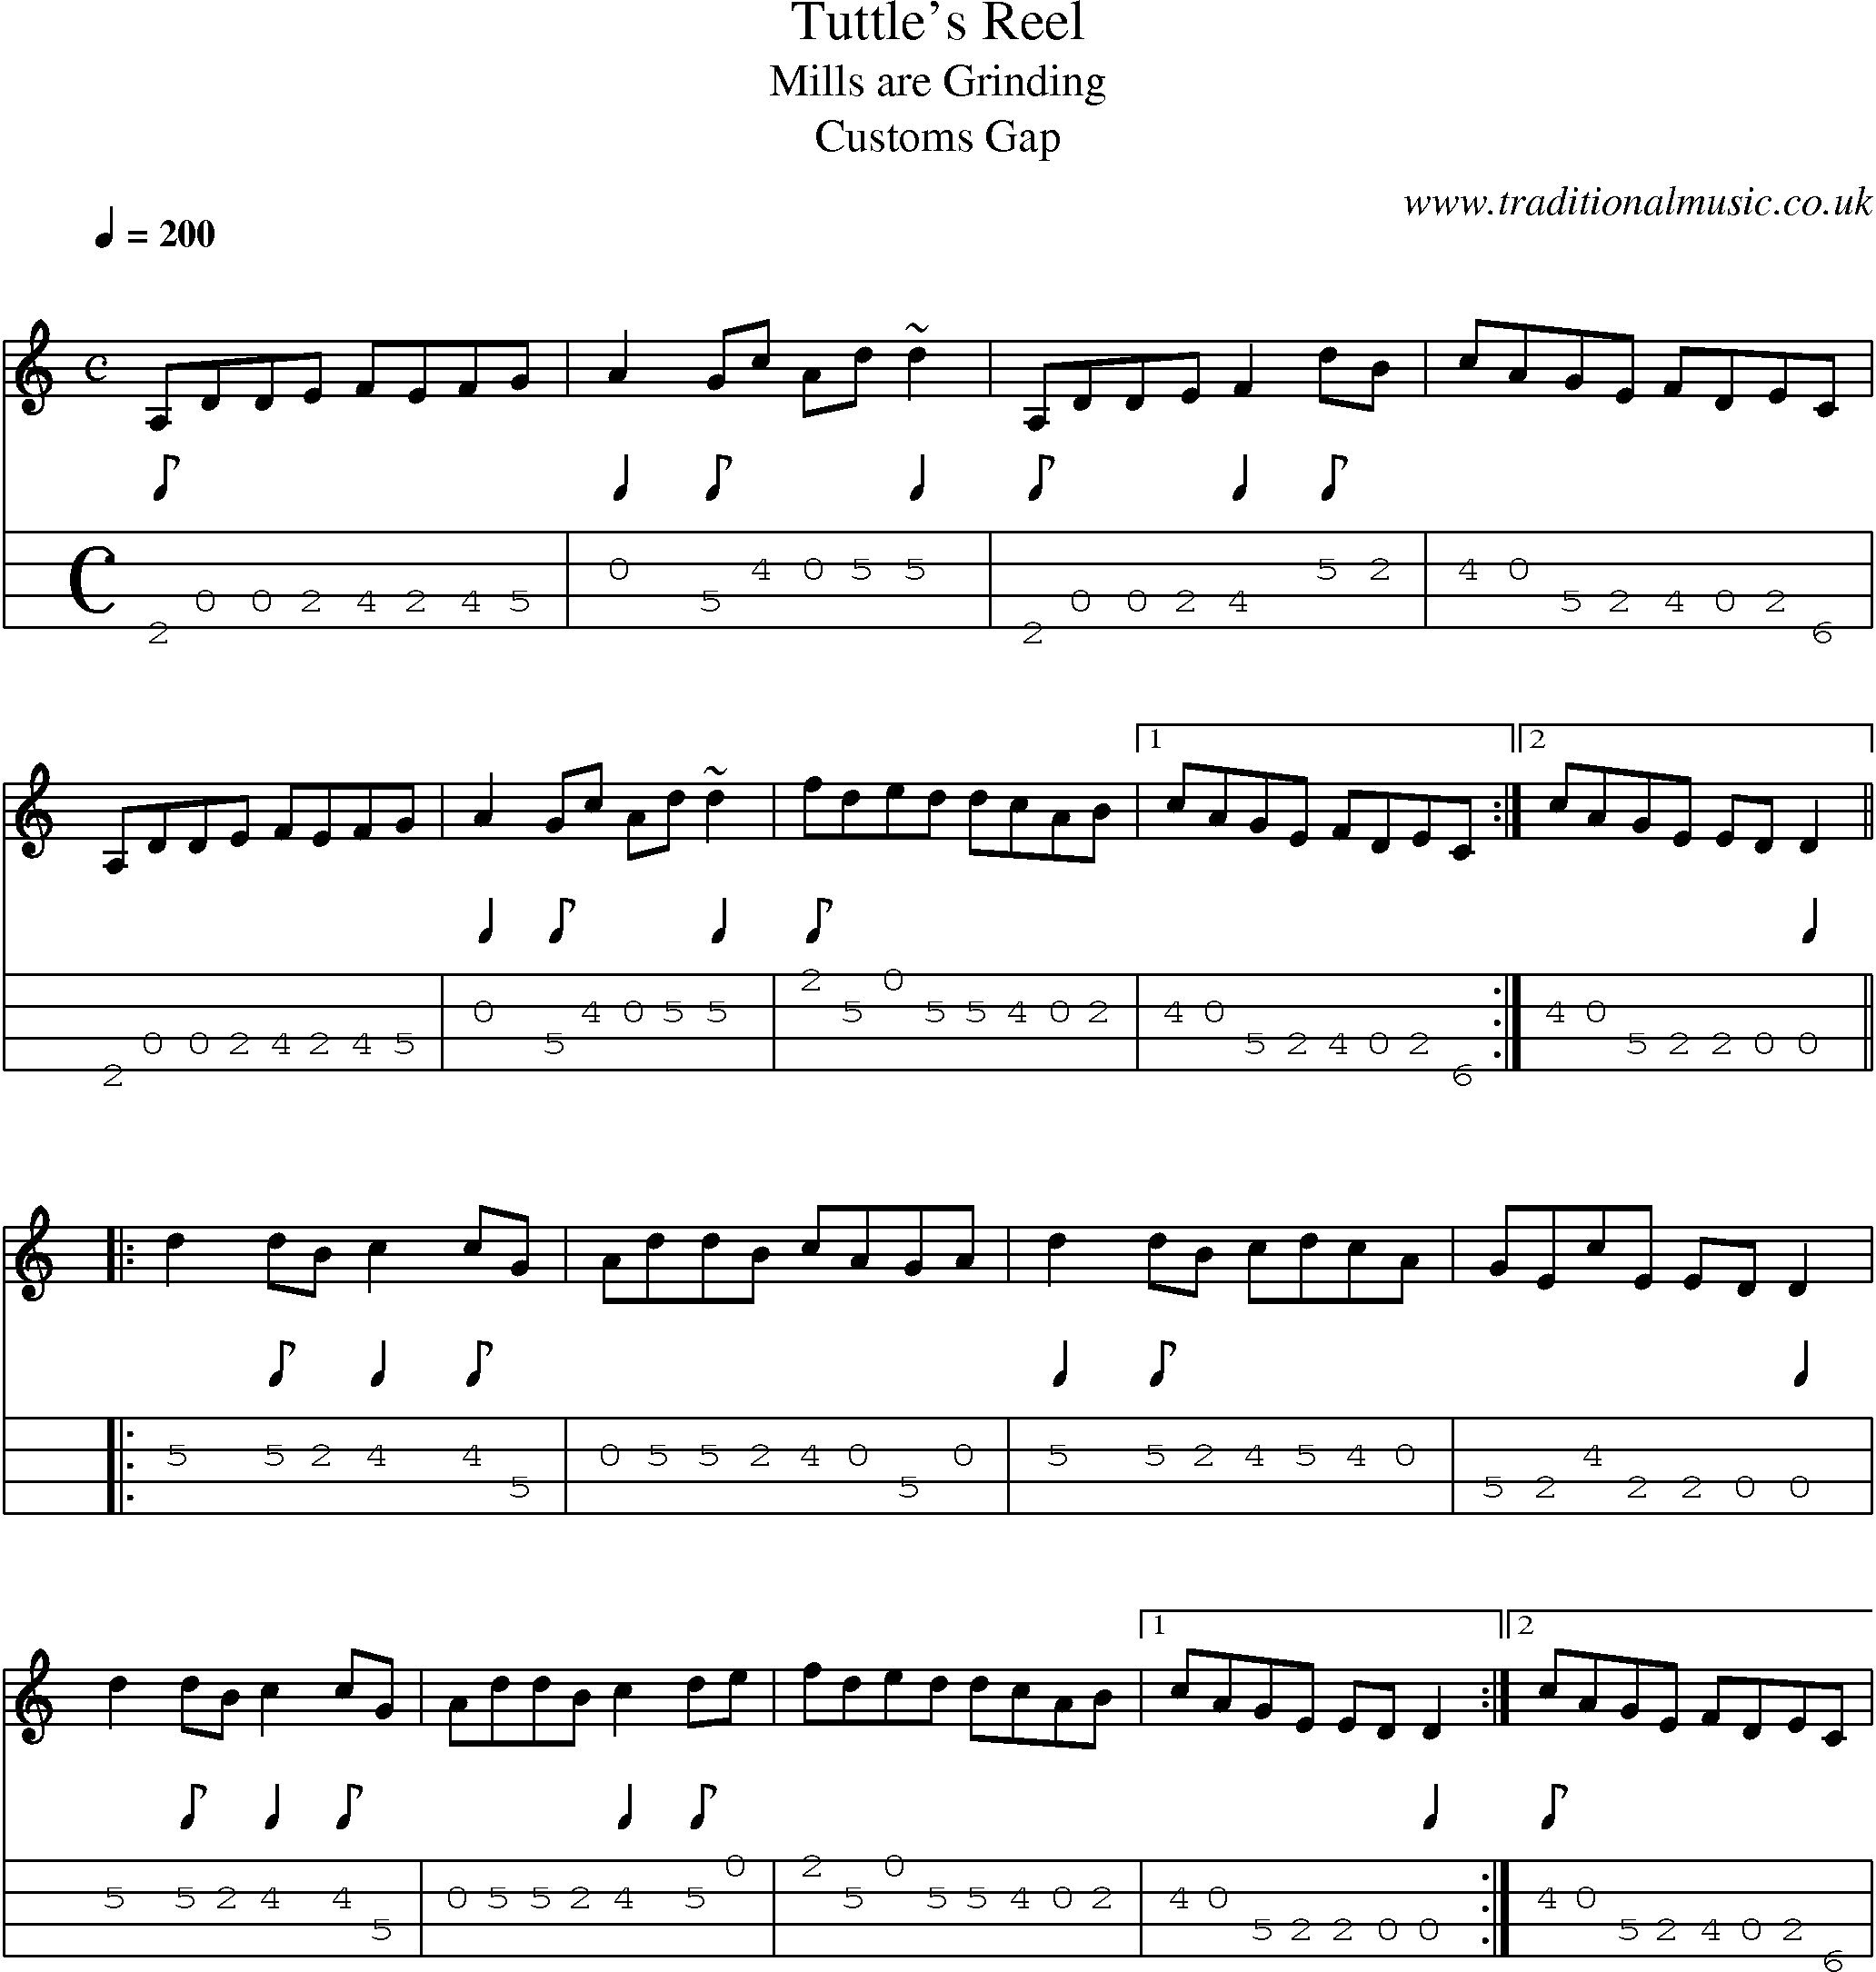 Music Score and Mandolin Tabs for Tuttles Reel